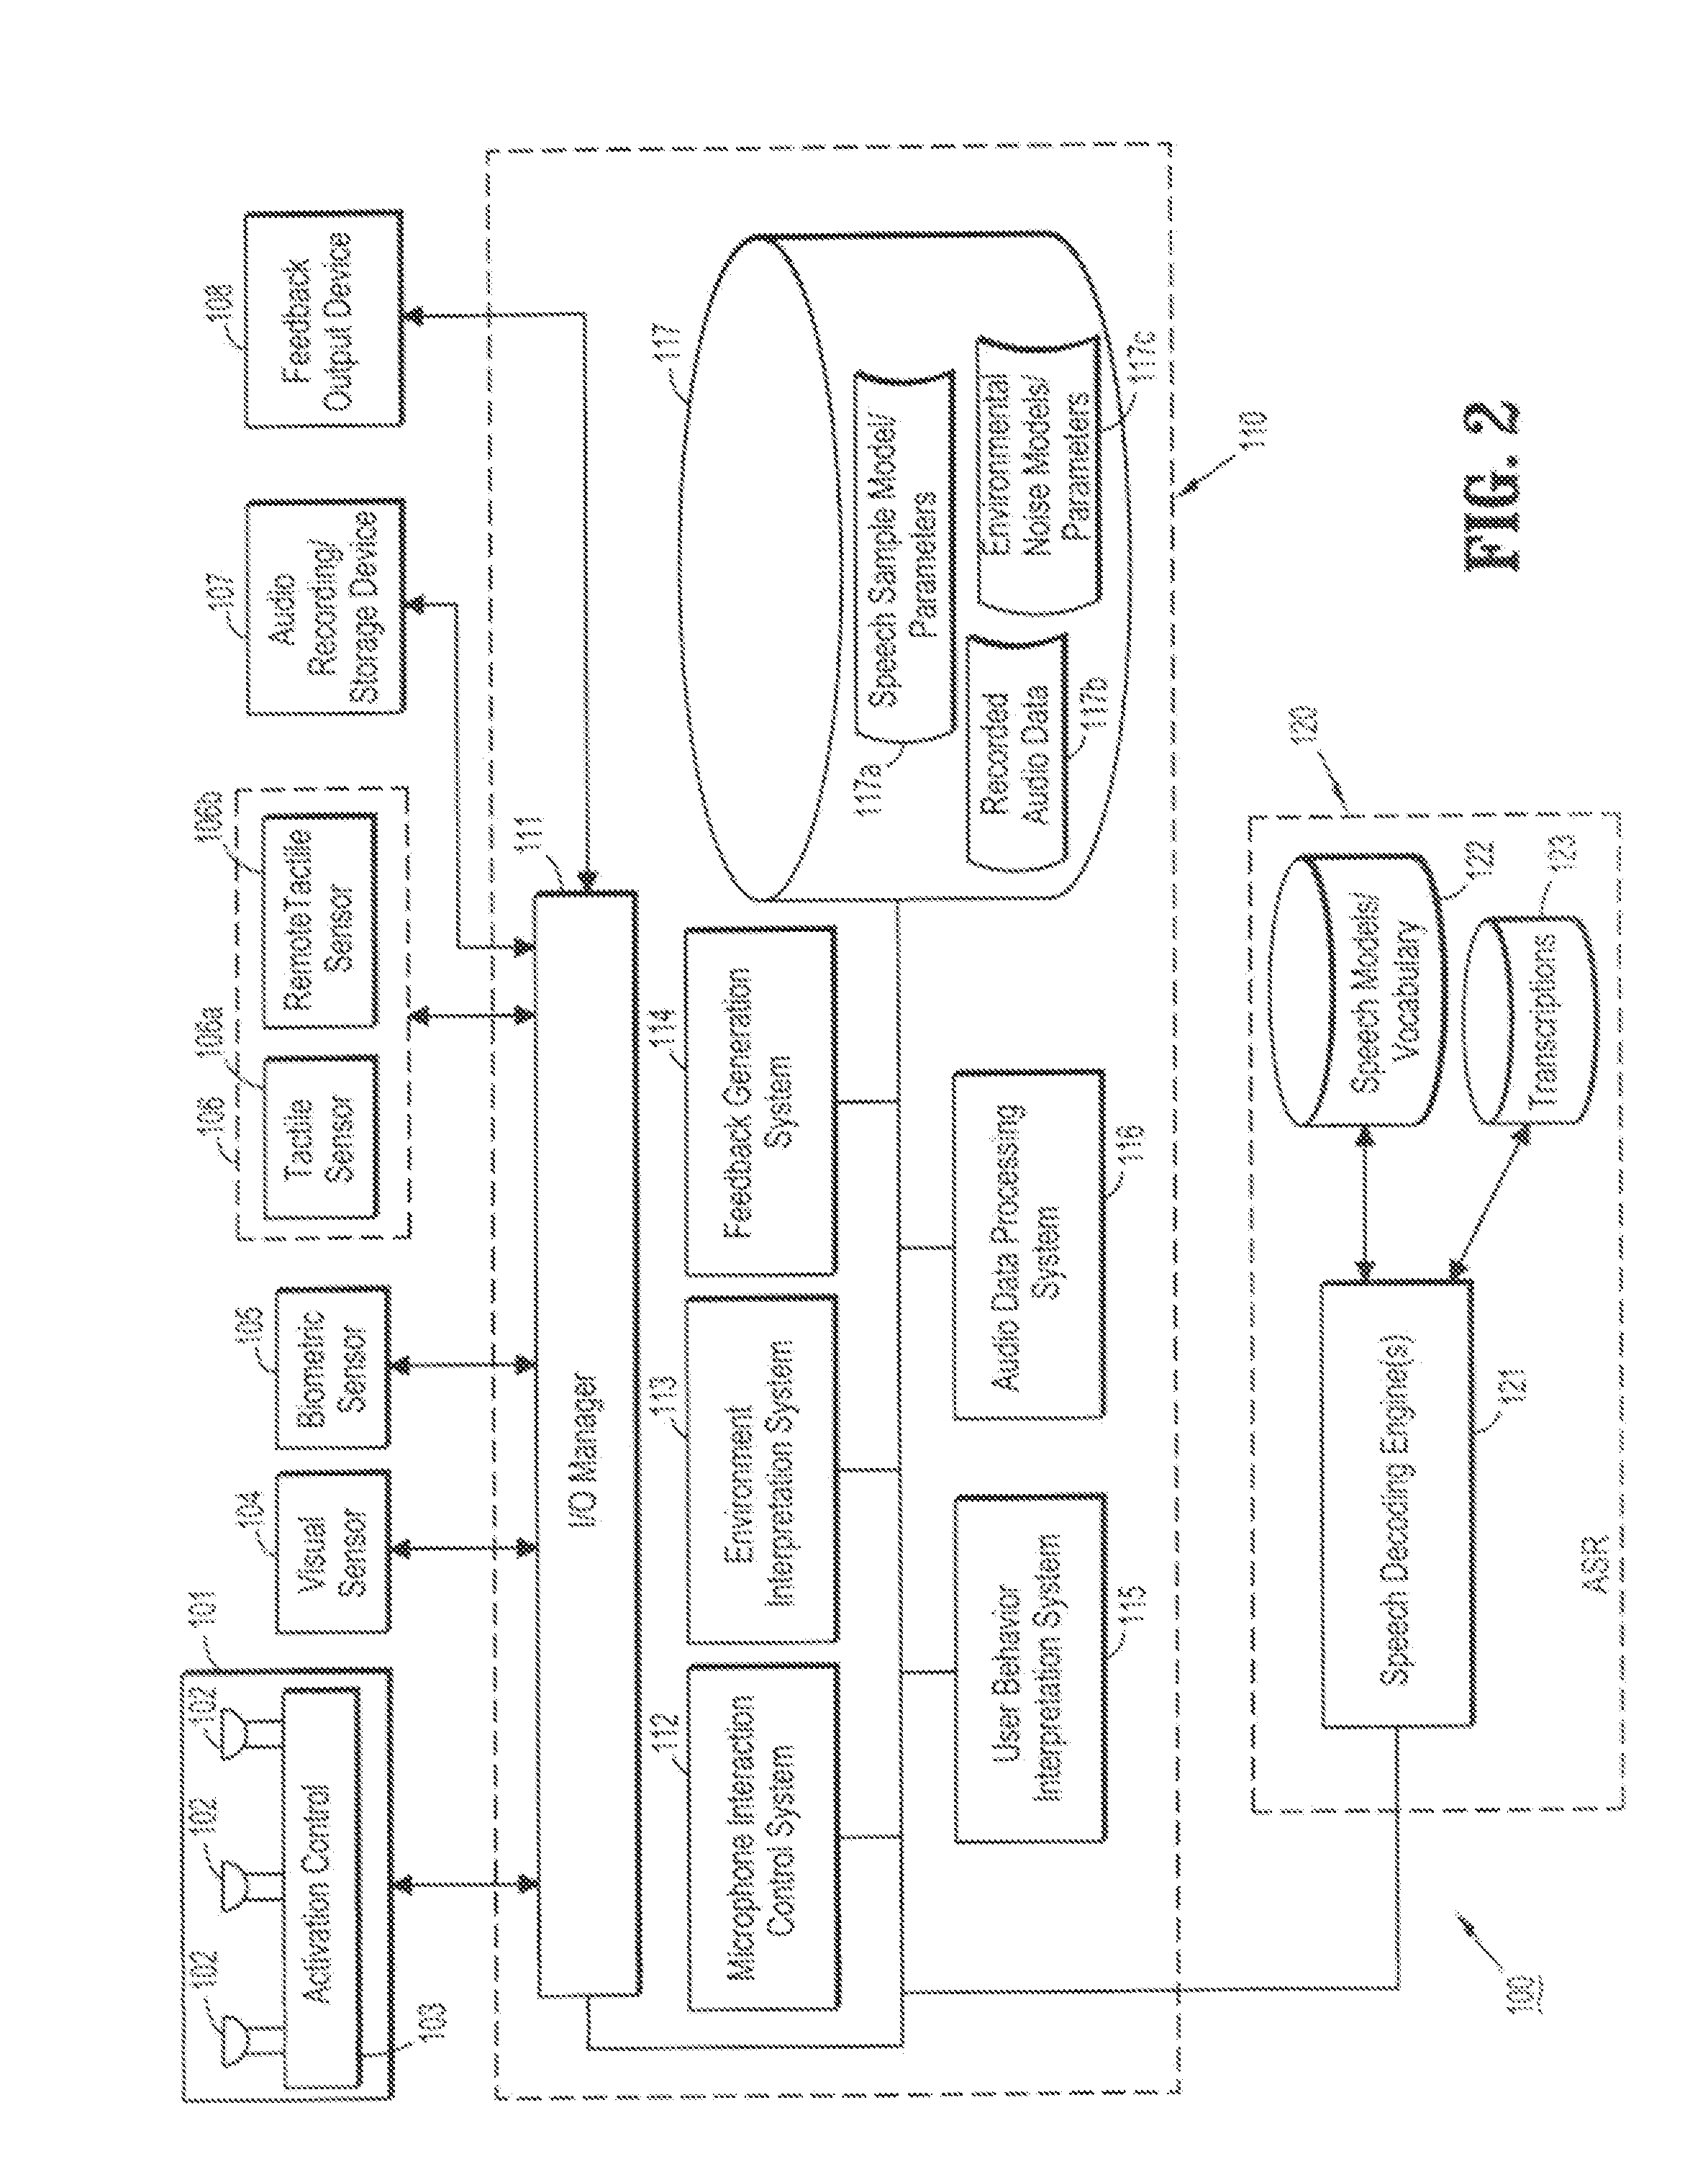 Systems and methods for intelligent control of microphones for speech recognition applications